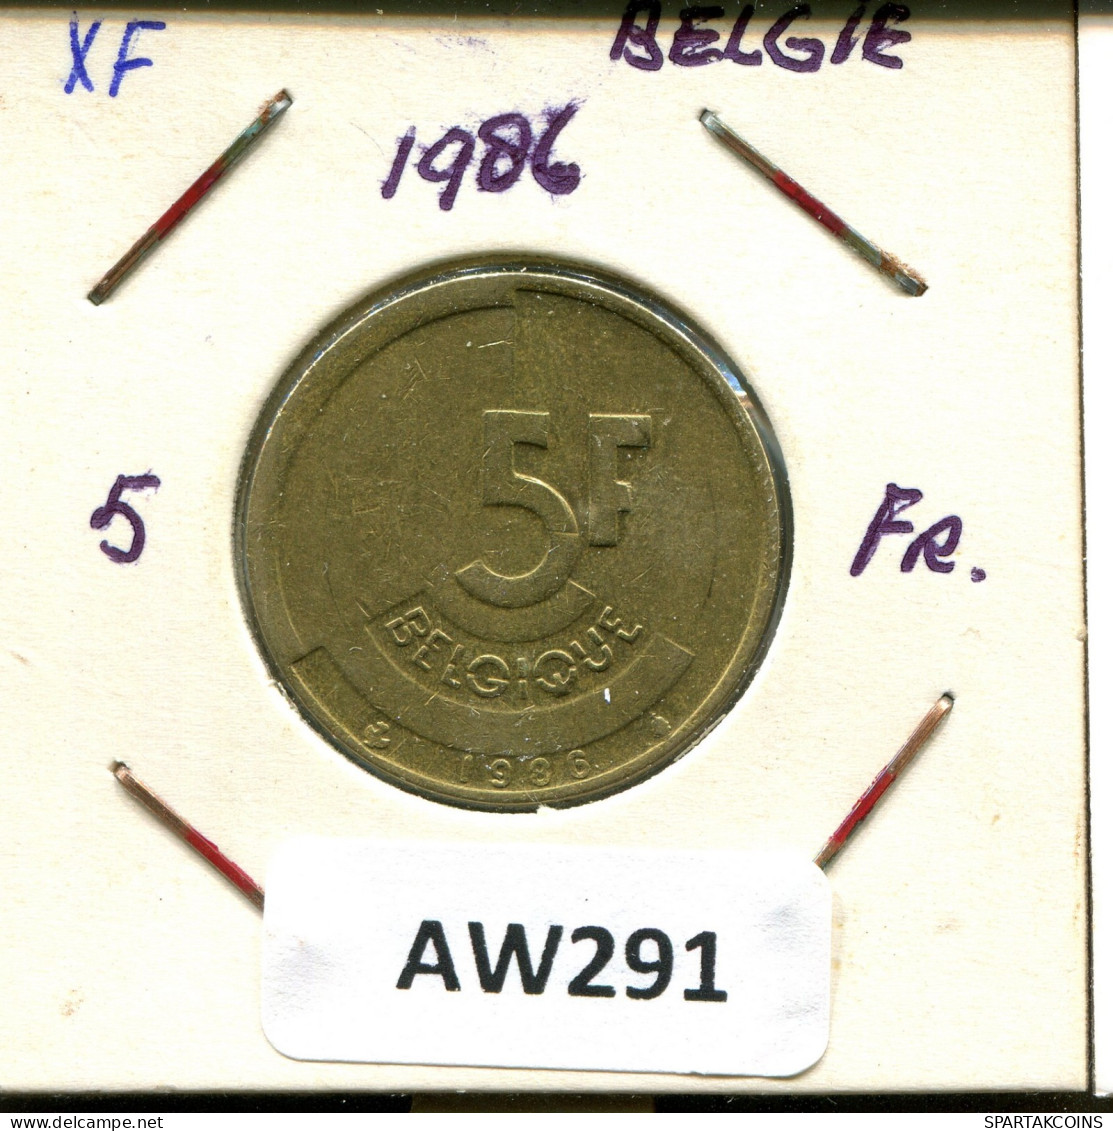 5 FRANCS 1986 FRENCH Text BELGIUM Coin I #AW291.U.A - 5 Frank